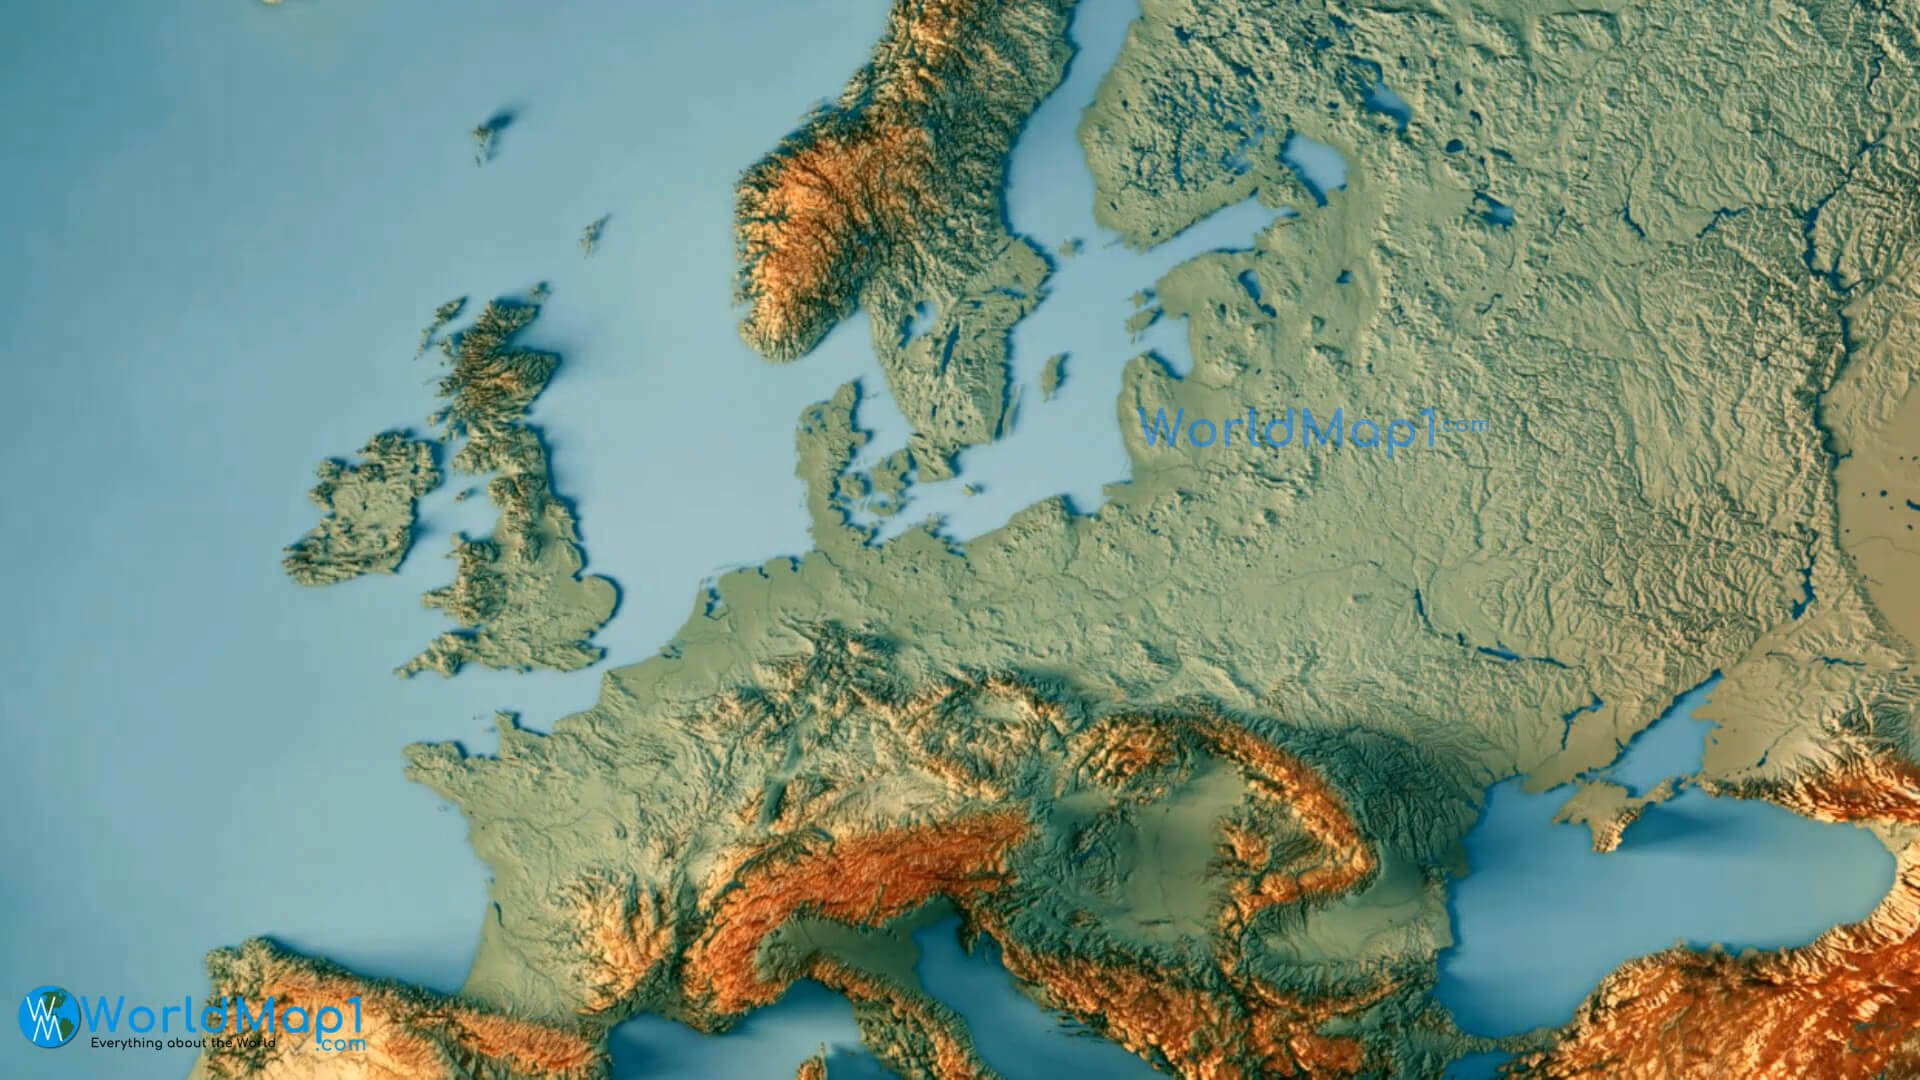 Europe Topography Map